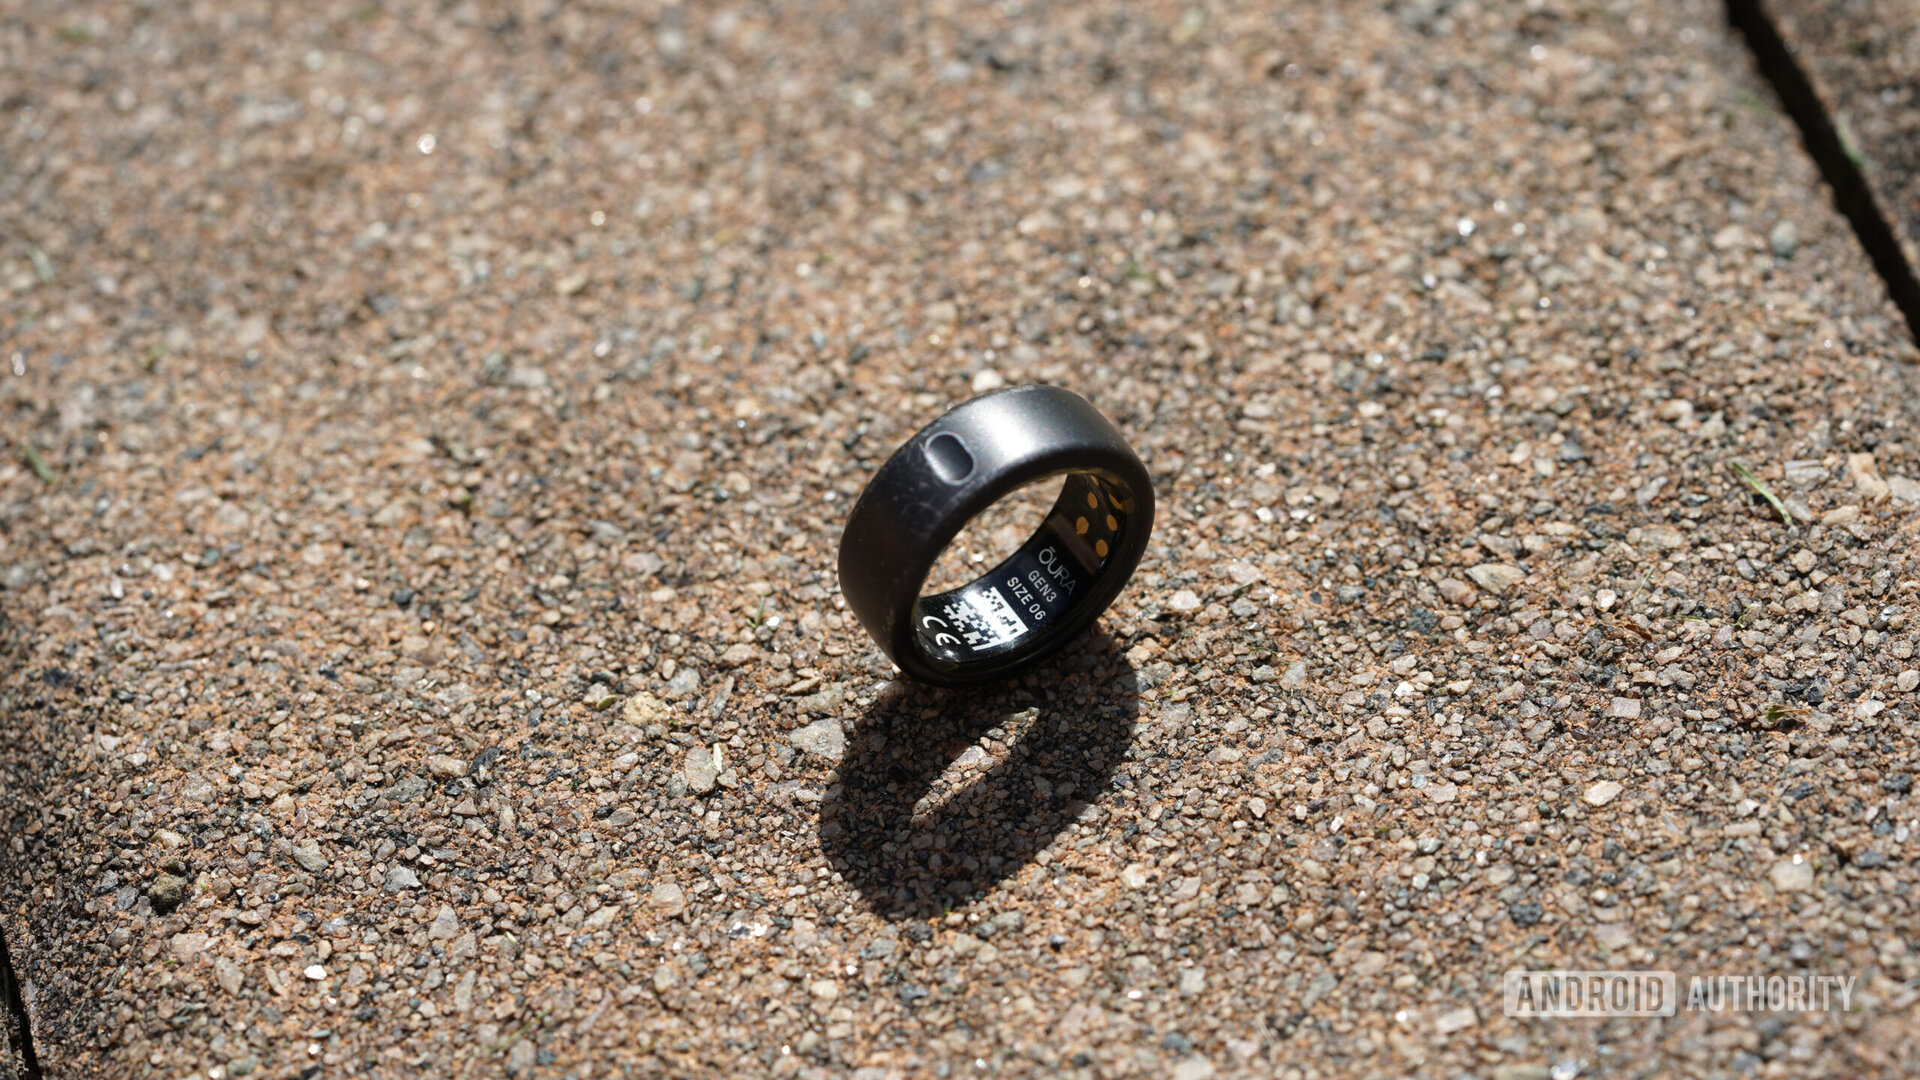 An Oura Ring rests on a stone surface, displaying its Gen 3 label.